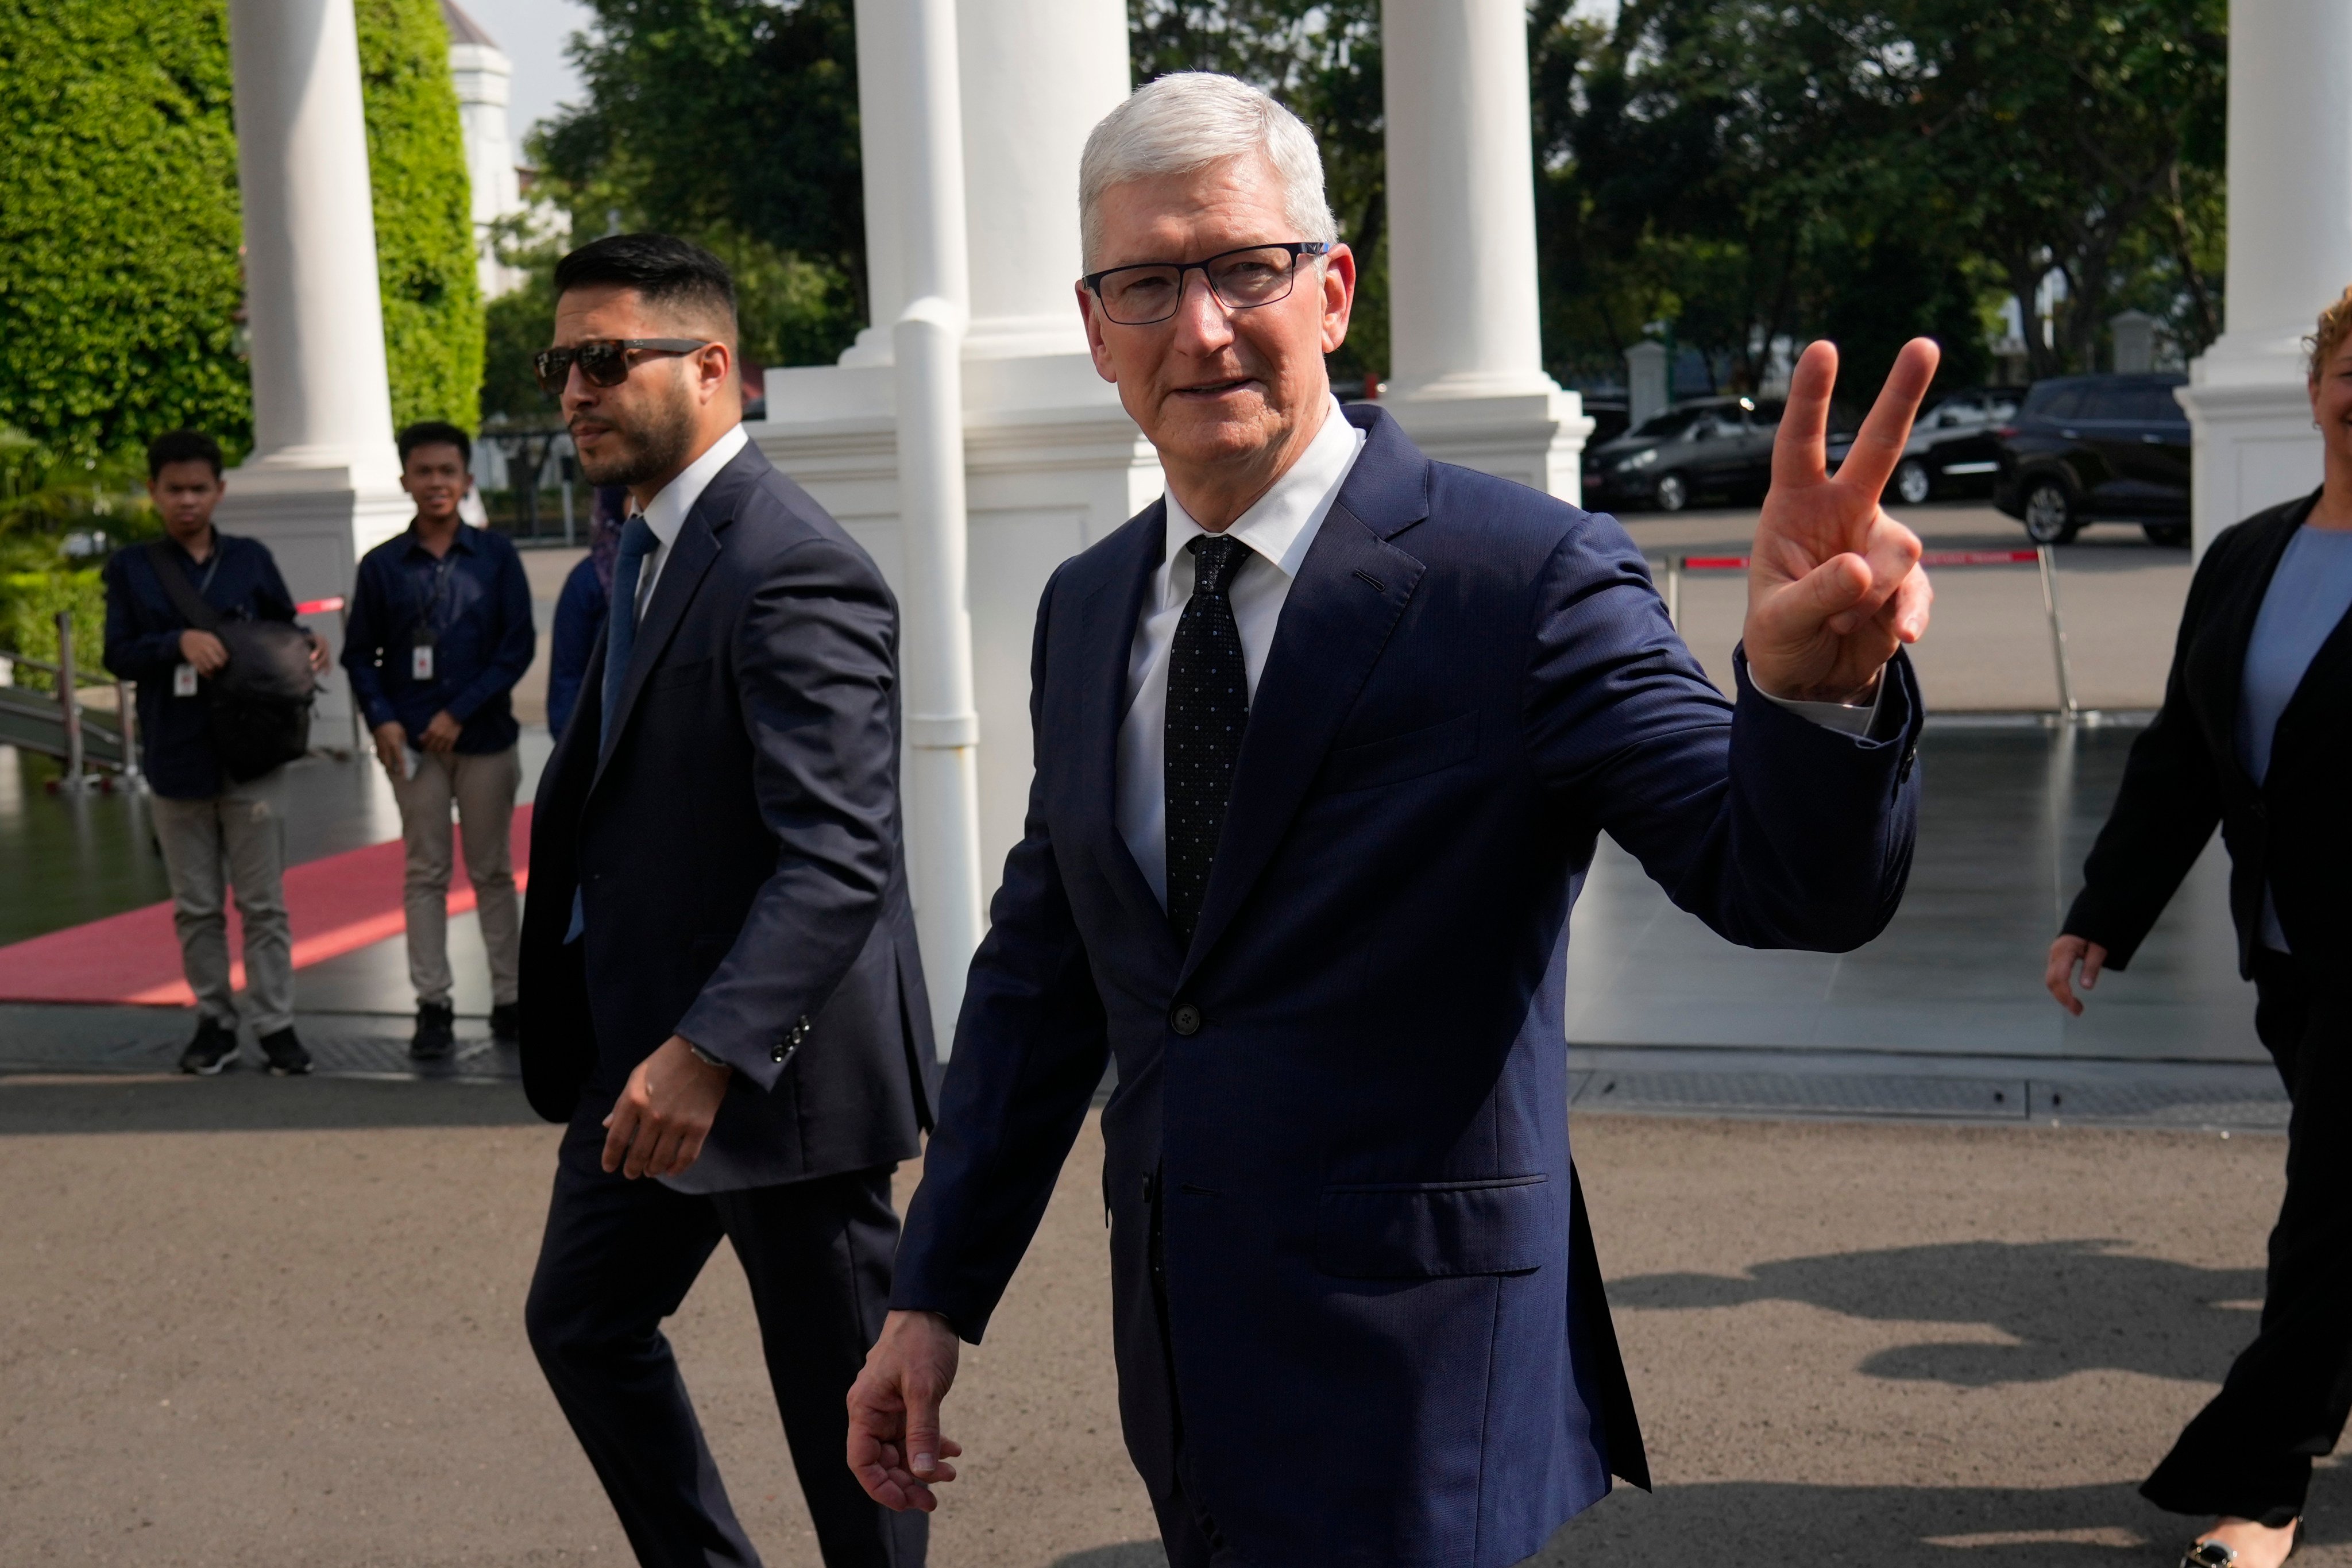 Apple CEO Tim Cook arrived for a meeting with Indonesian President Joko Widodo at the palace in Jakarta, Indonesia, on Wednesday. Photo: AP Photo